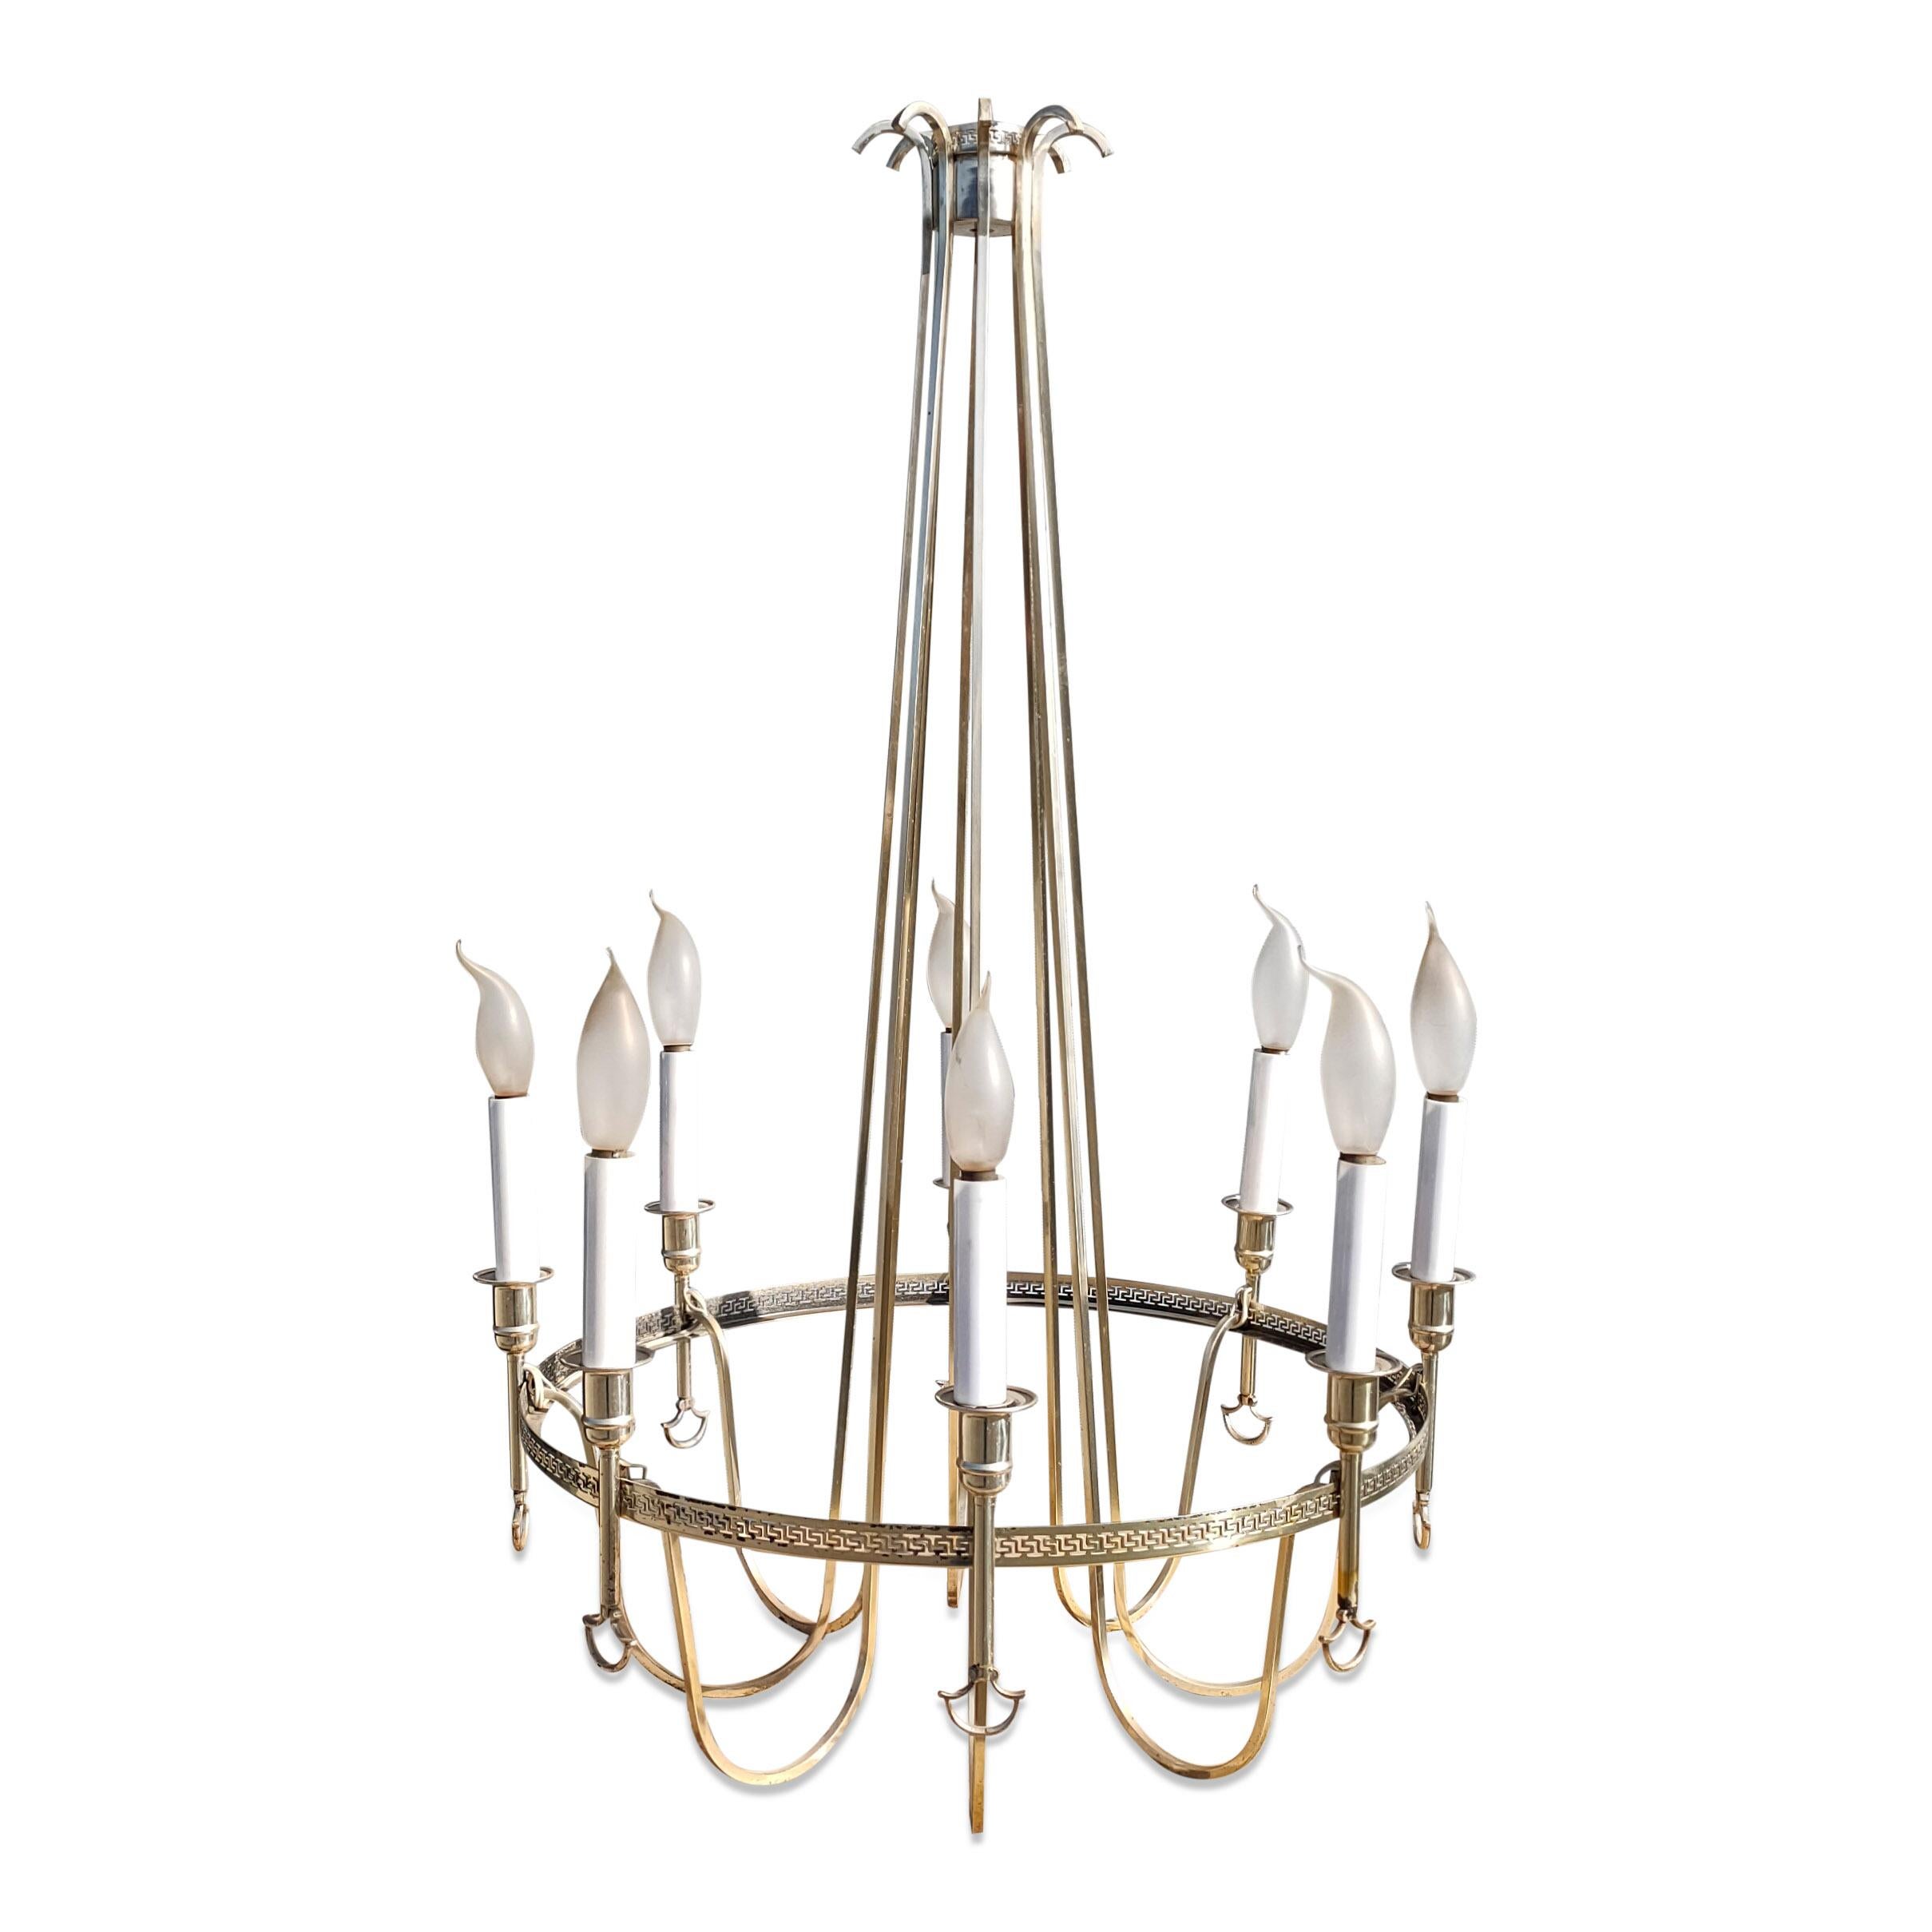 1970's neo classical solid stainless steel chandelier
Circular frieze and upper part ornaments
European sockets and wiring
The chandlier will ship without the bulbs.